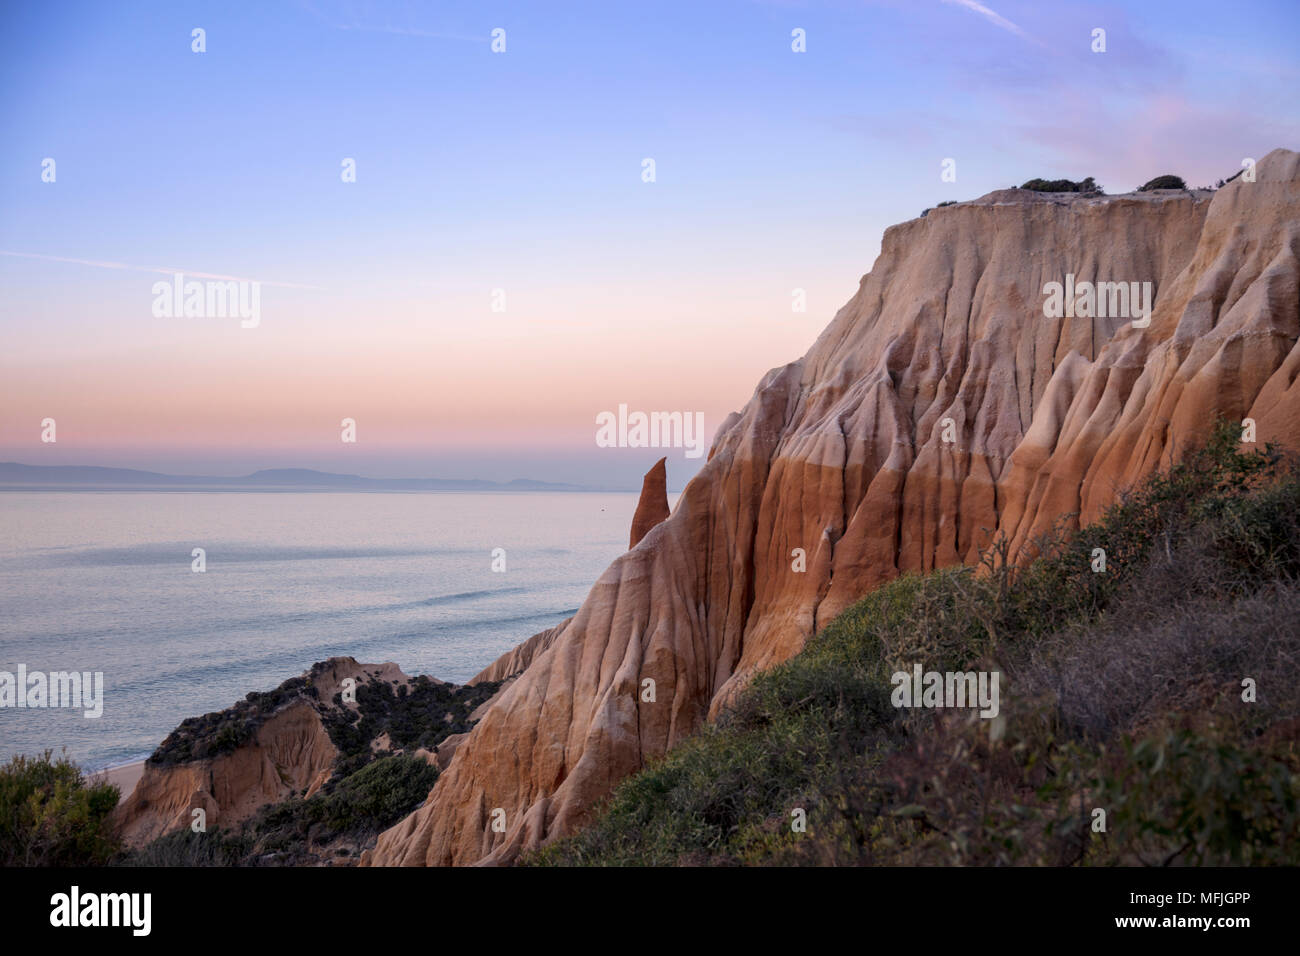 A sandstone cliff at Carvalhal on the Alentejo coast, Portugal, Europe Stock Photo